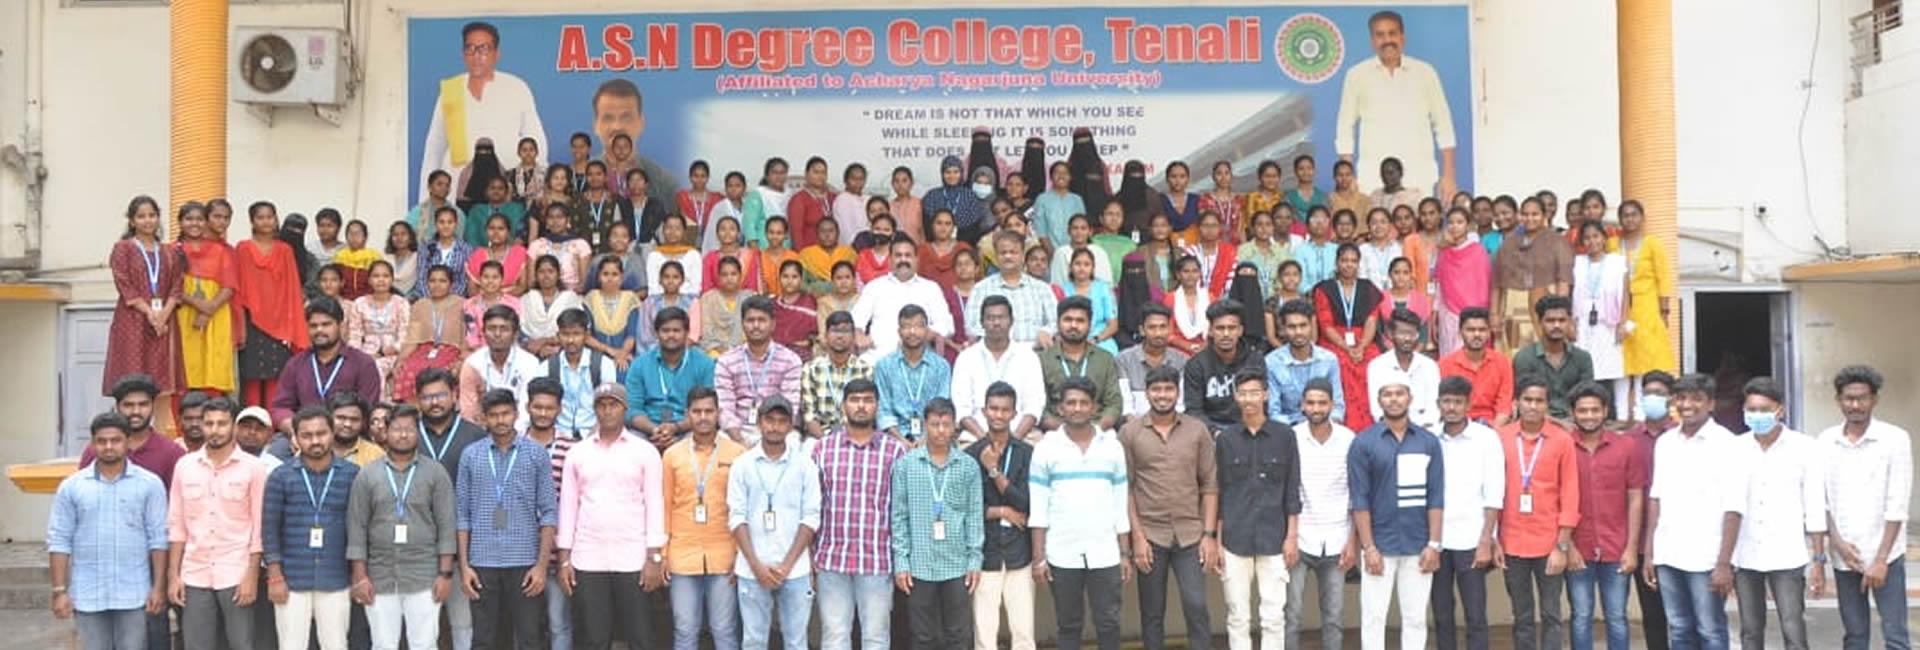 A.S.N. DEGREE COLLEGE